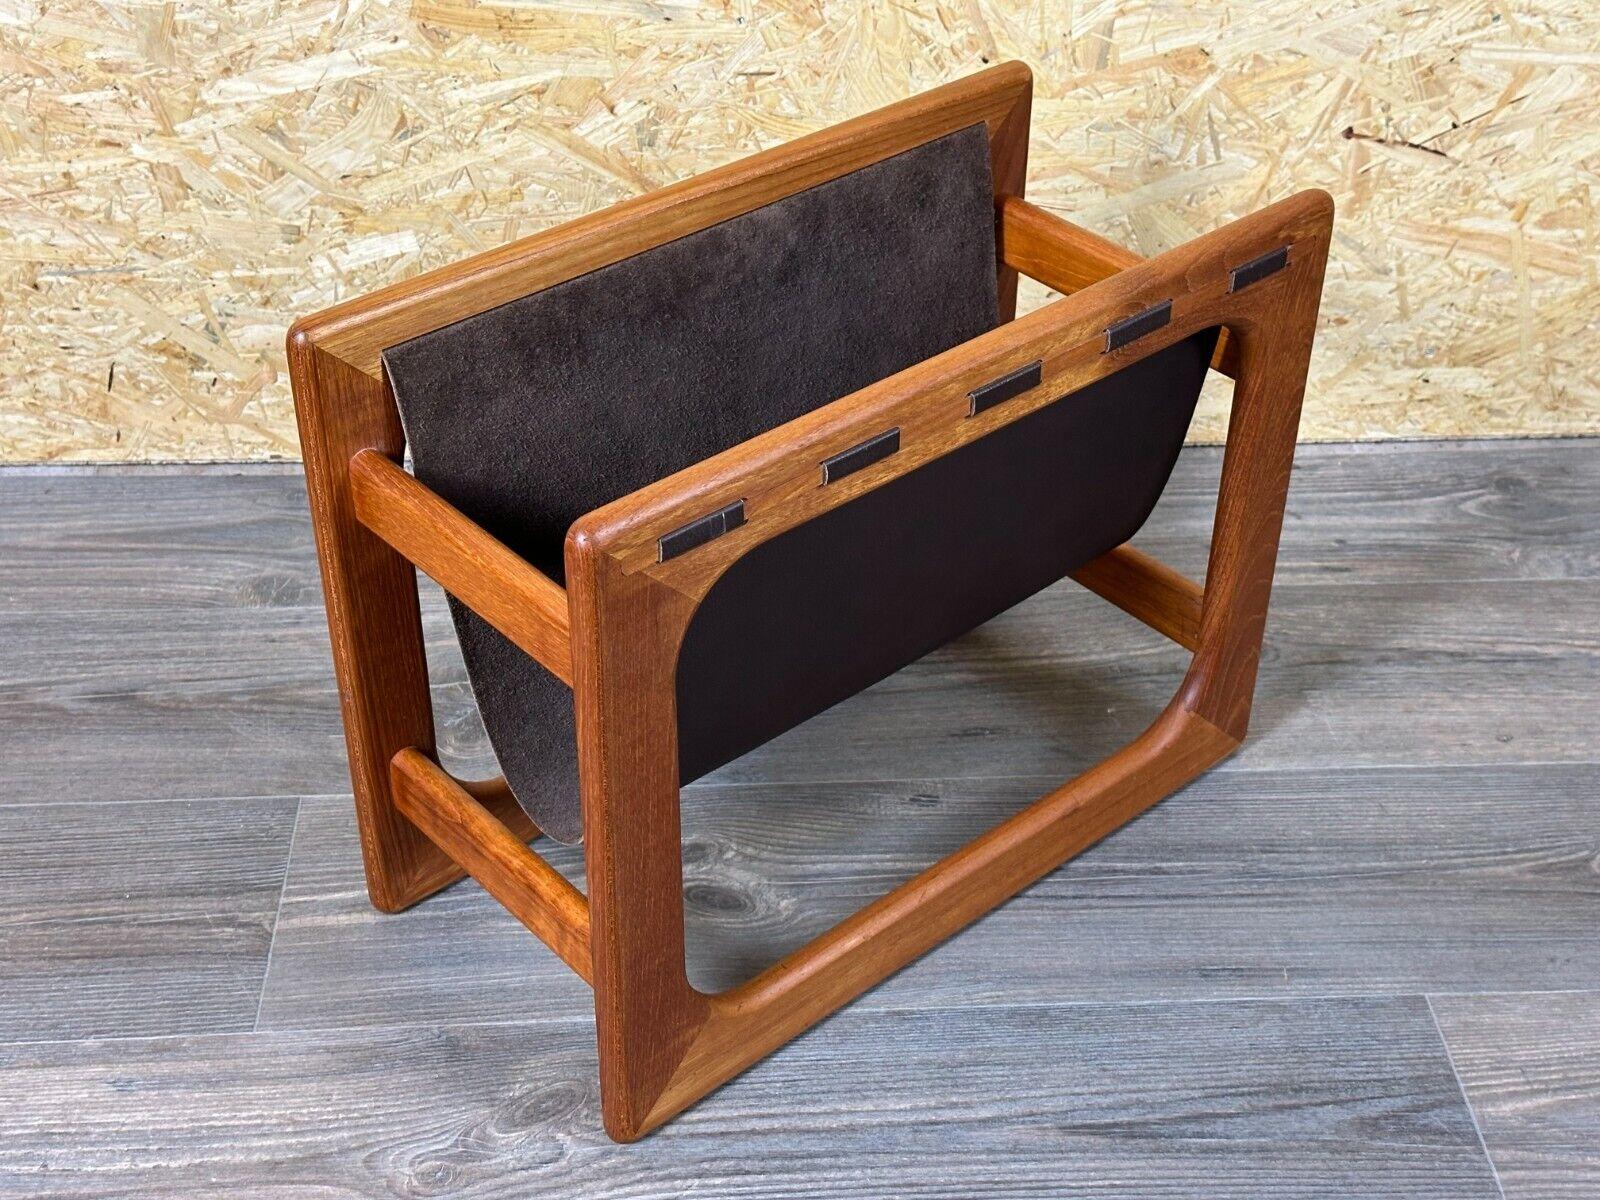 60s 70s newspaper holder Aksel Kjersgaard made of teak & leather In Good Condition For Sale In Neuenkirchen, NI